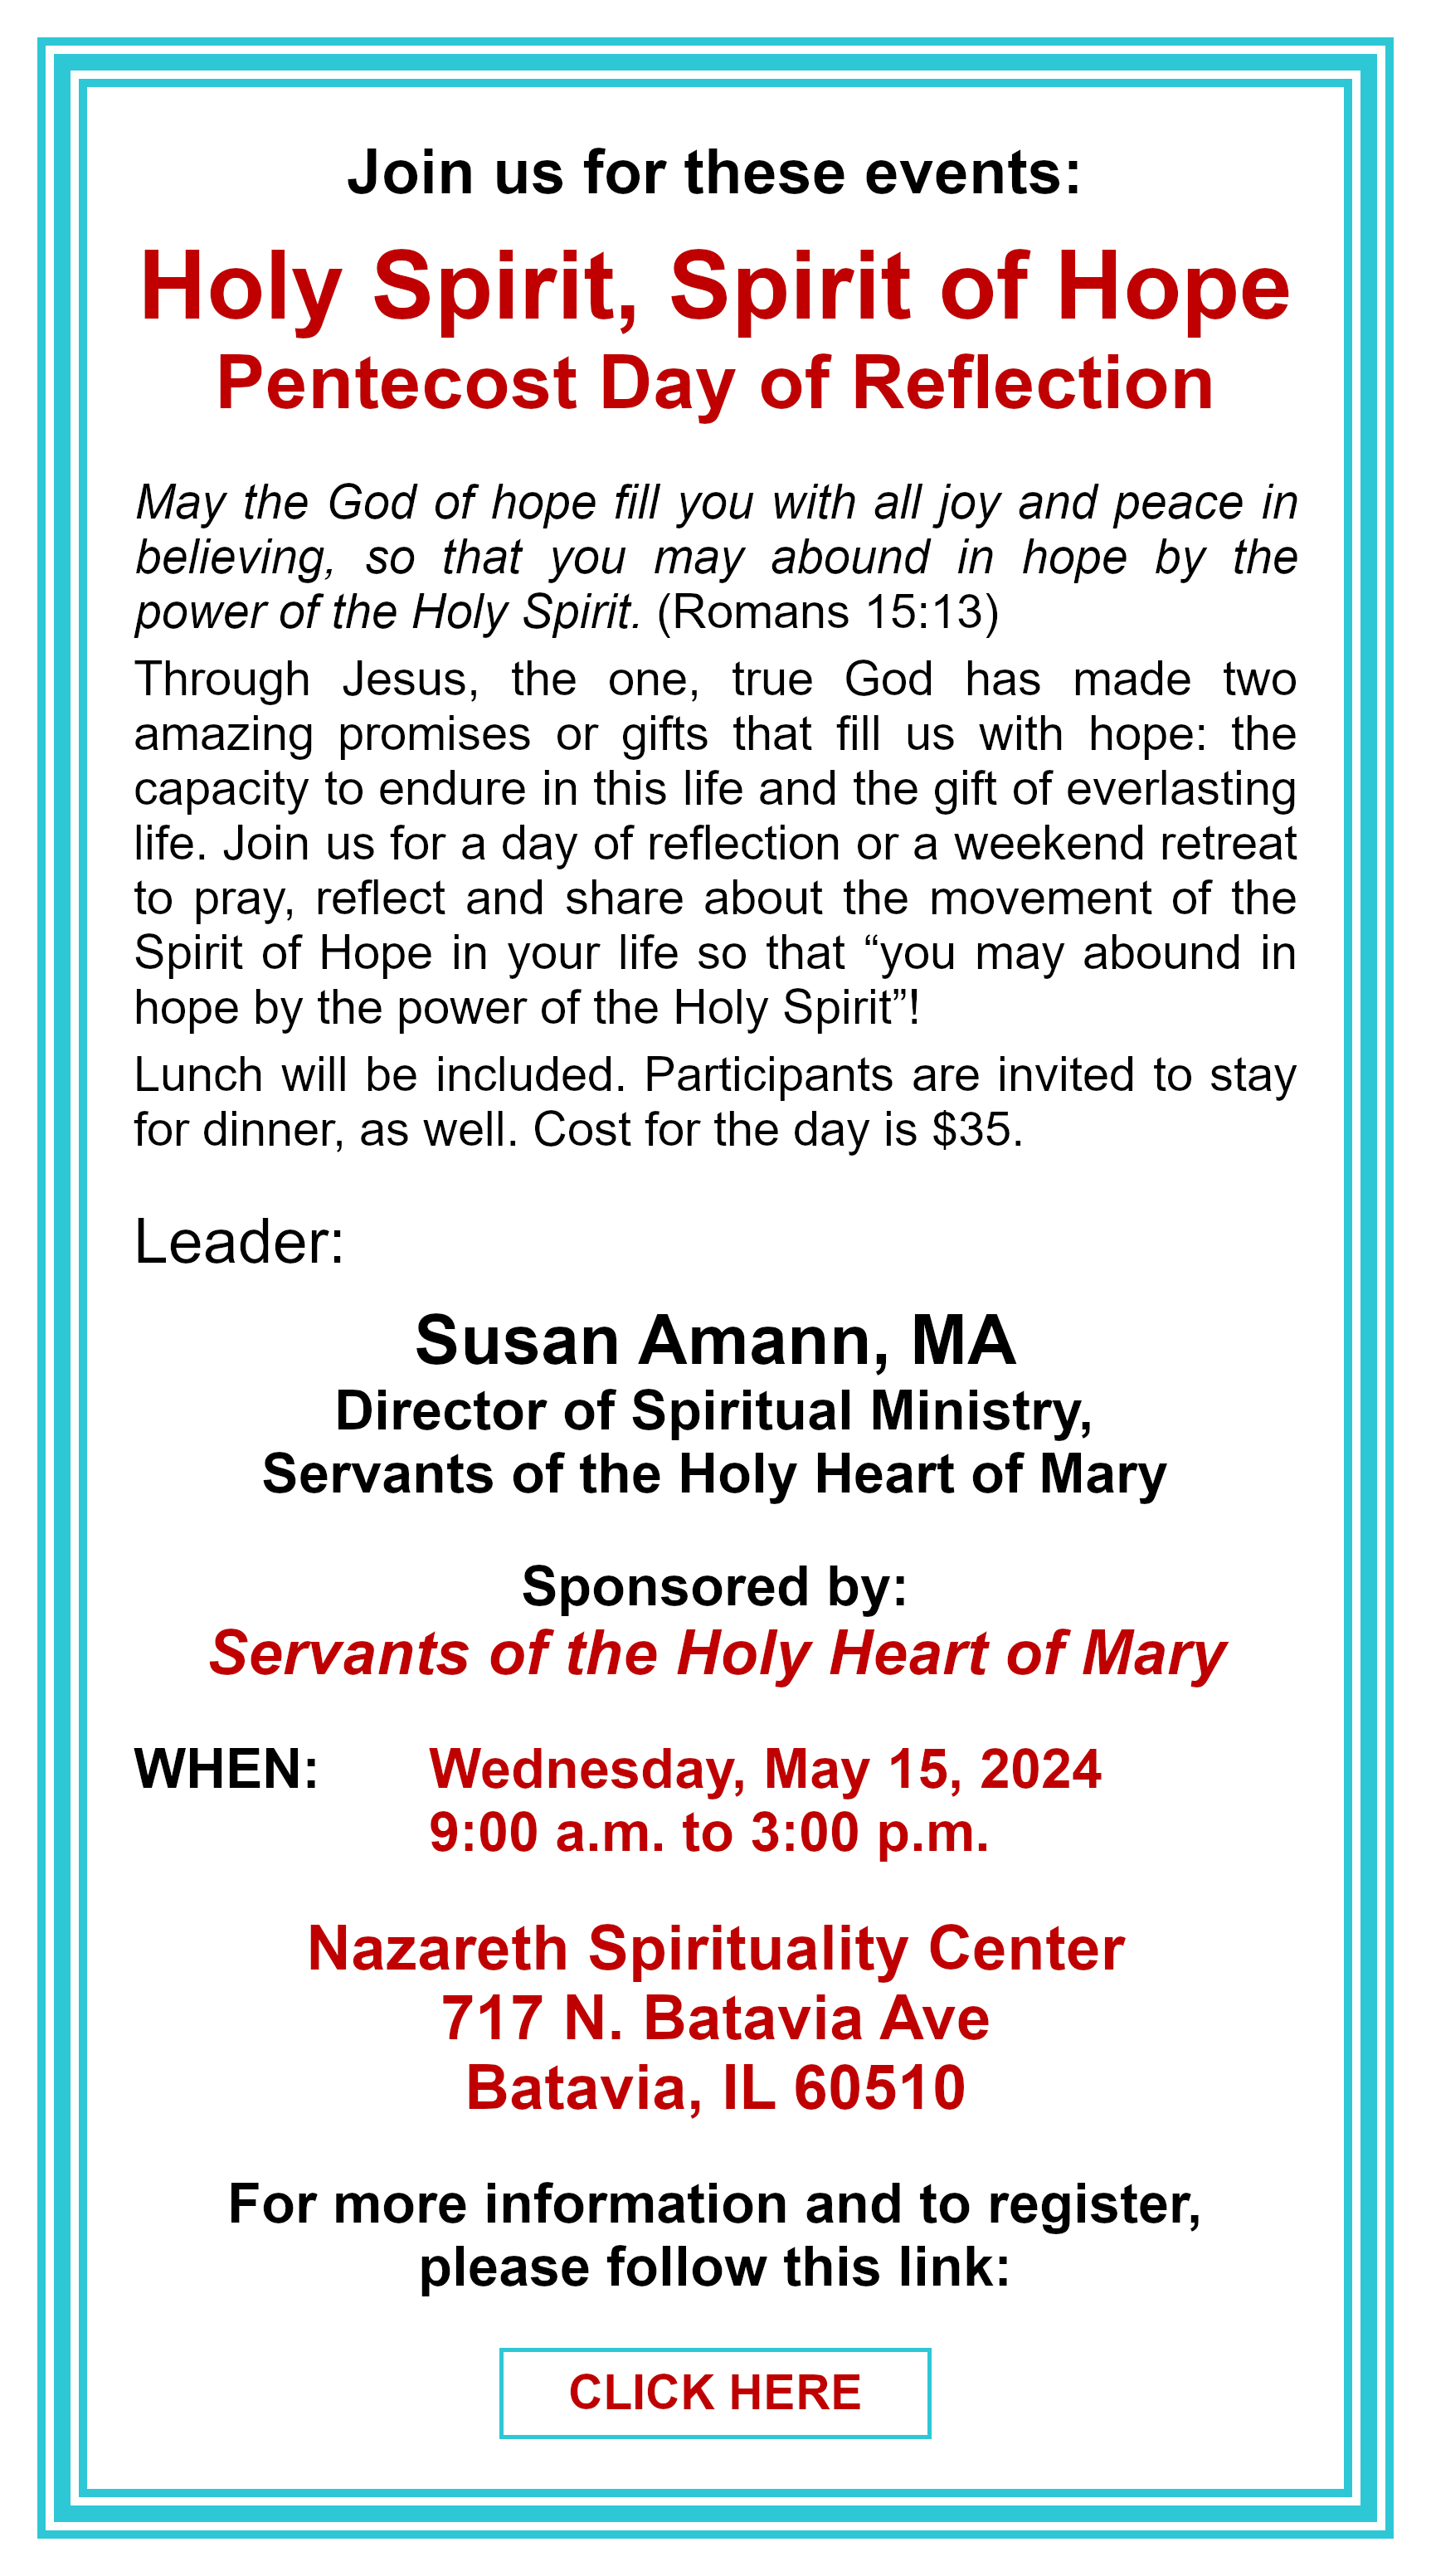 Holy Spirit, Spirit of Hope Pentecost Day of Reflection: Click here for more information